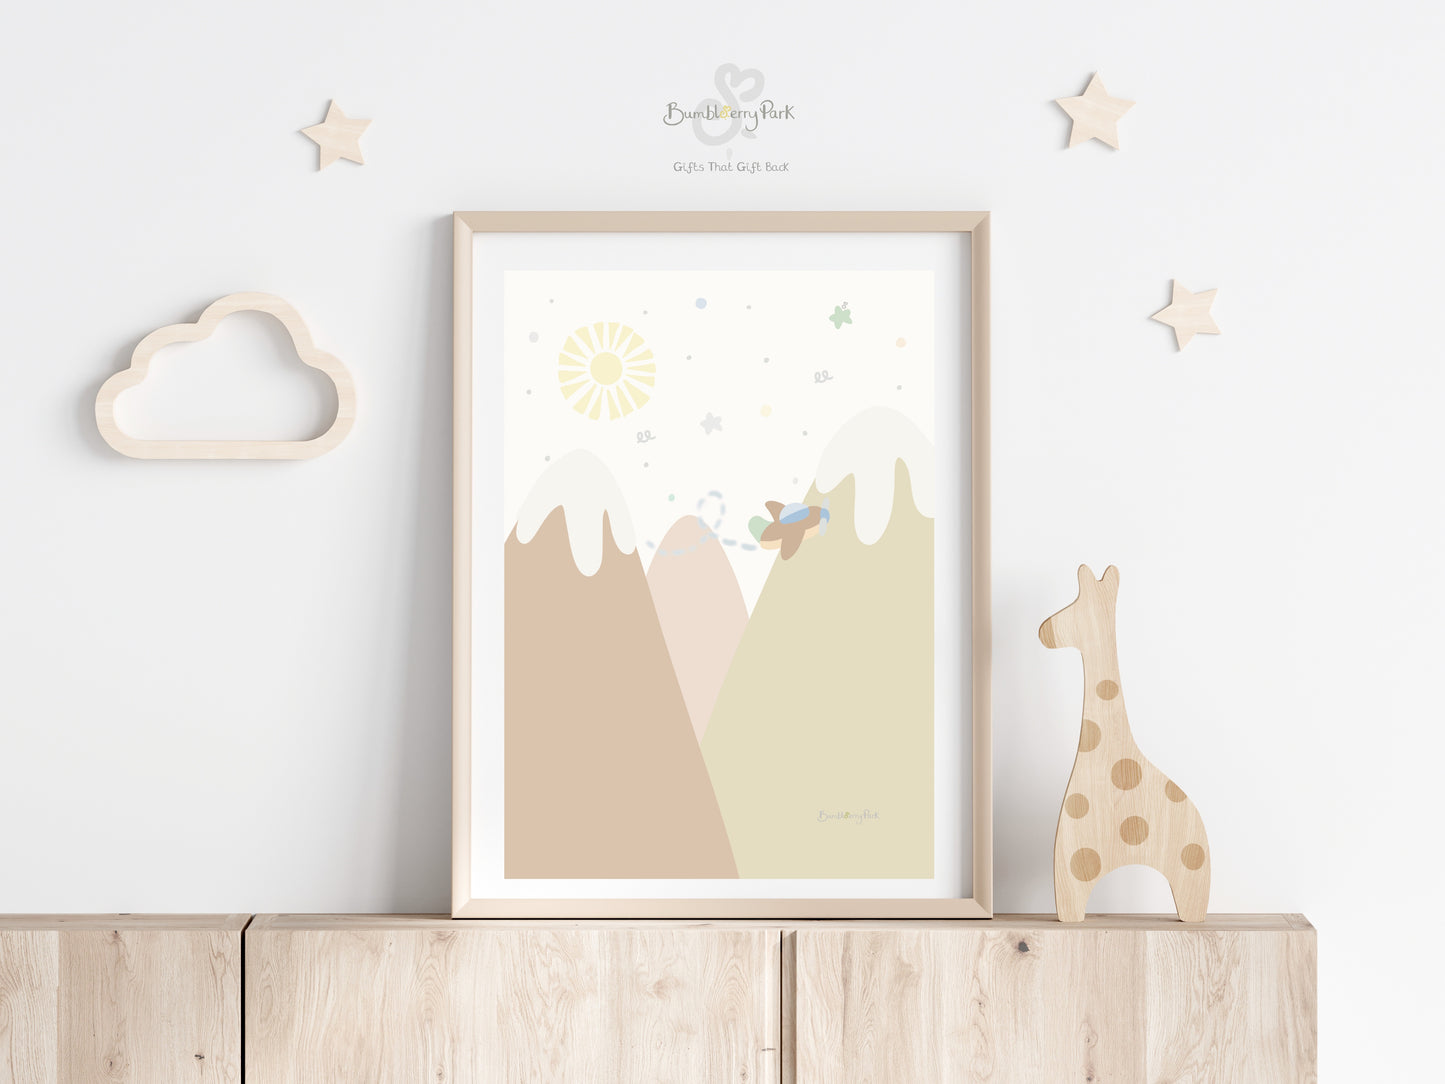 scandi inspired little explorer nursery posters for children's bedroom. Neutral nursery decor prints with travel and transport theme decor with mountains, sunshine, hot air balloon and aeroplane features